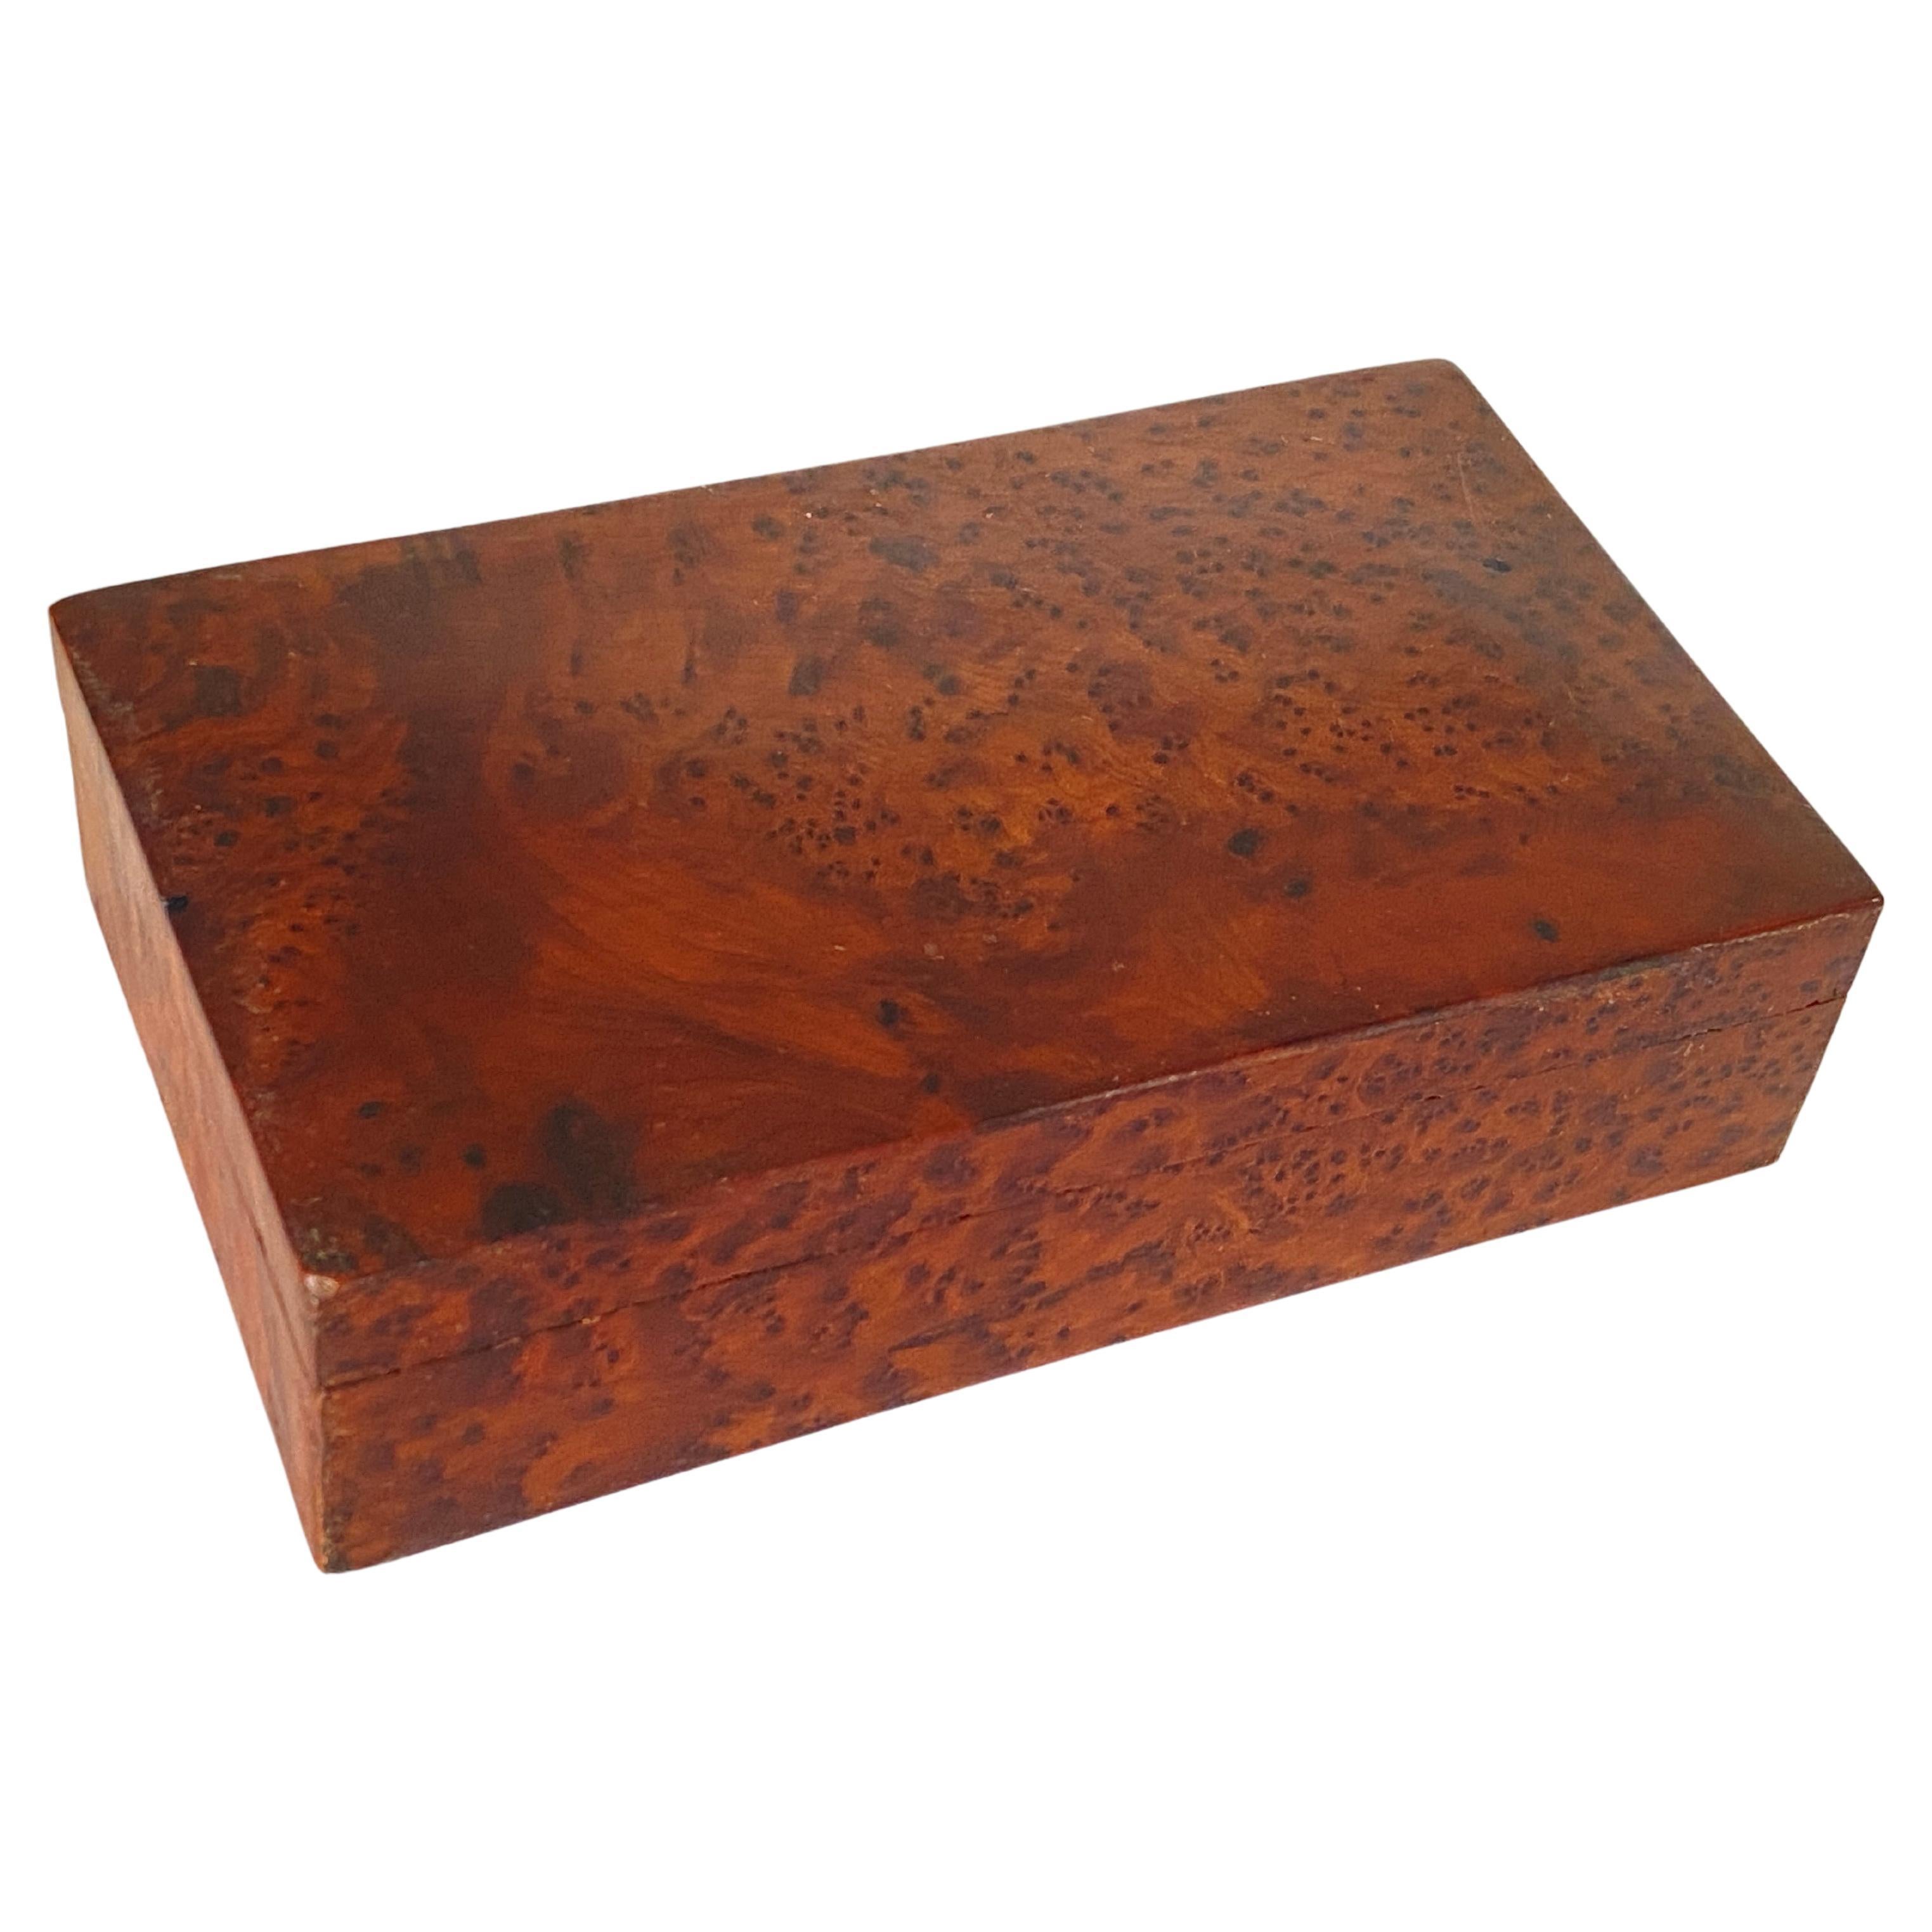 Cigar Box or Decorative Box in Burled Wood, Brown Color, France, 20th Century For Sale